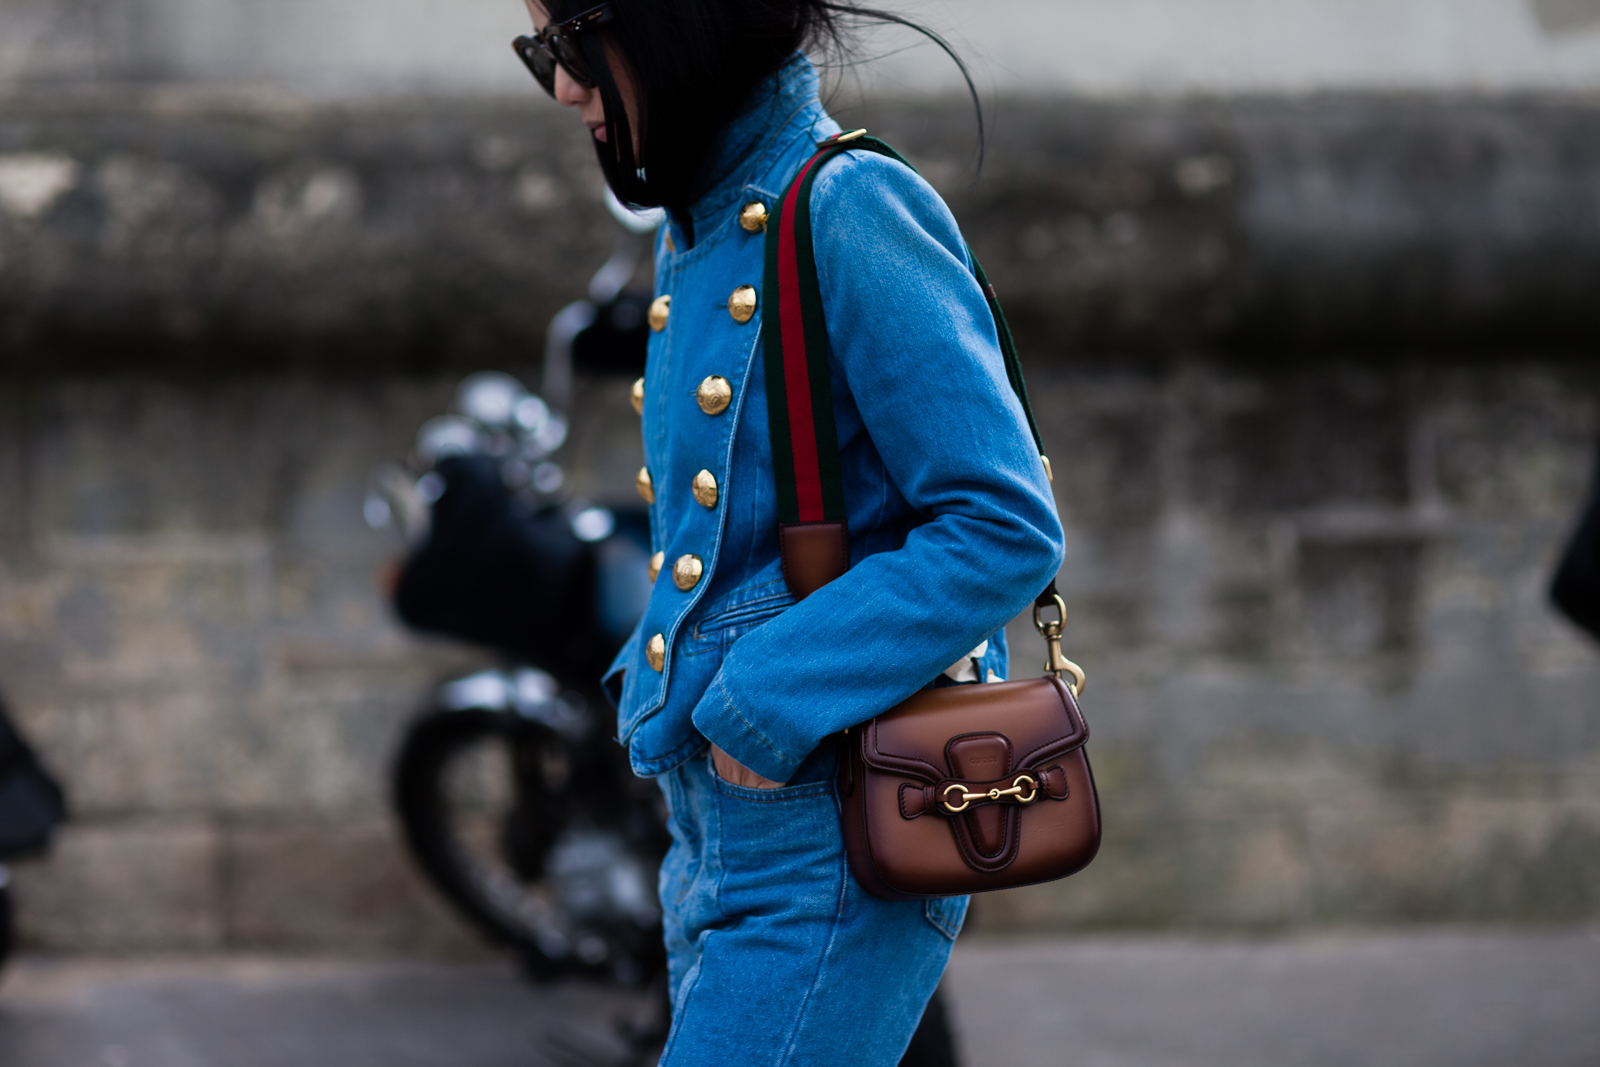 Yoyo Cao wearing a Gucci denim jacket and Gucci bag after a fashion show in Paris, France